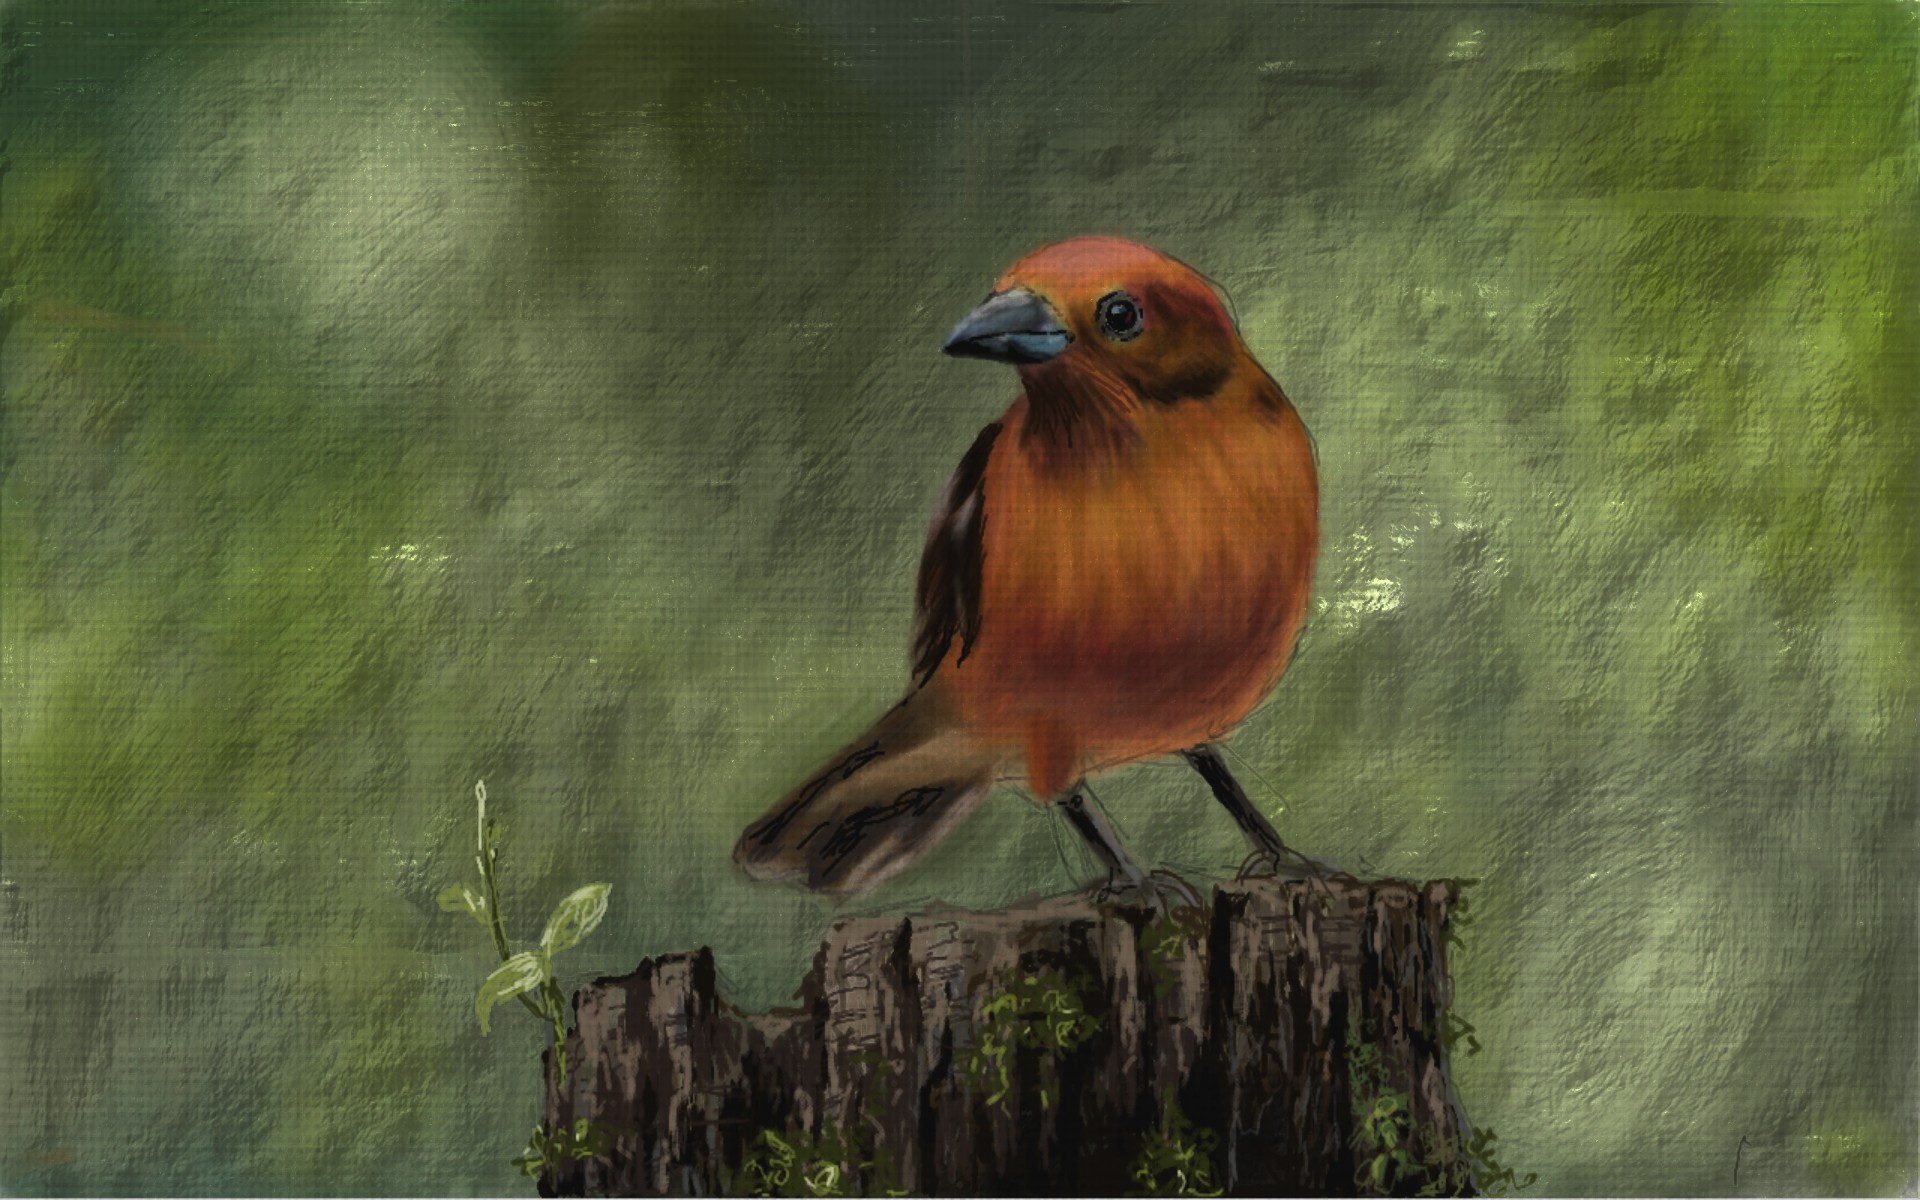 Painting done with Nvidia's new DirectStylus 2 and native painting app.